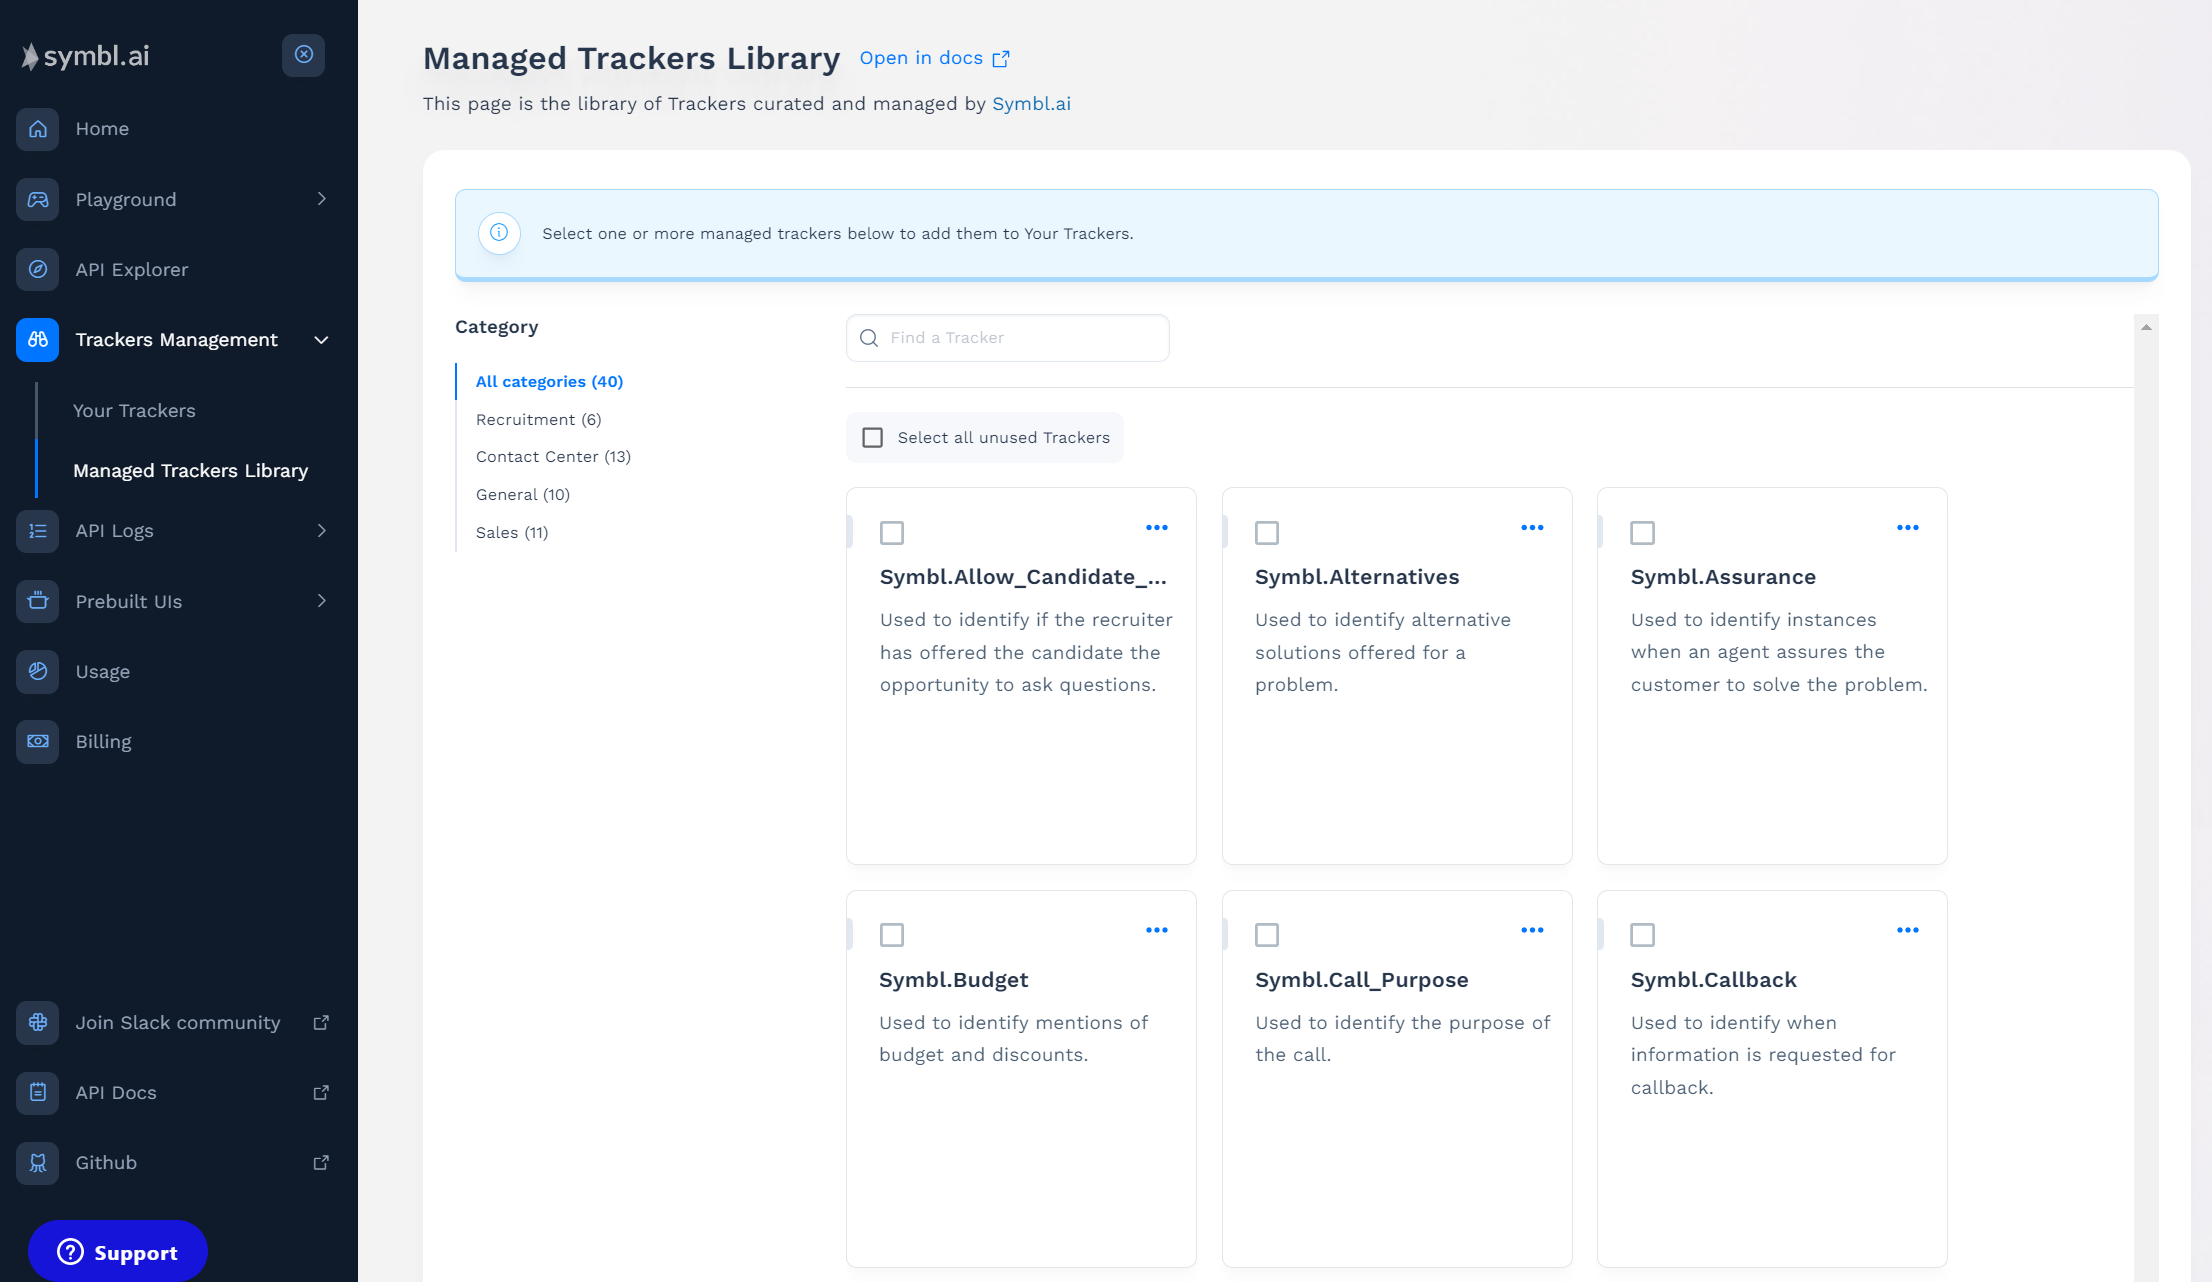 Managed Trackers Library